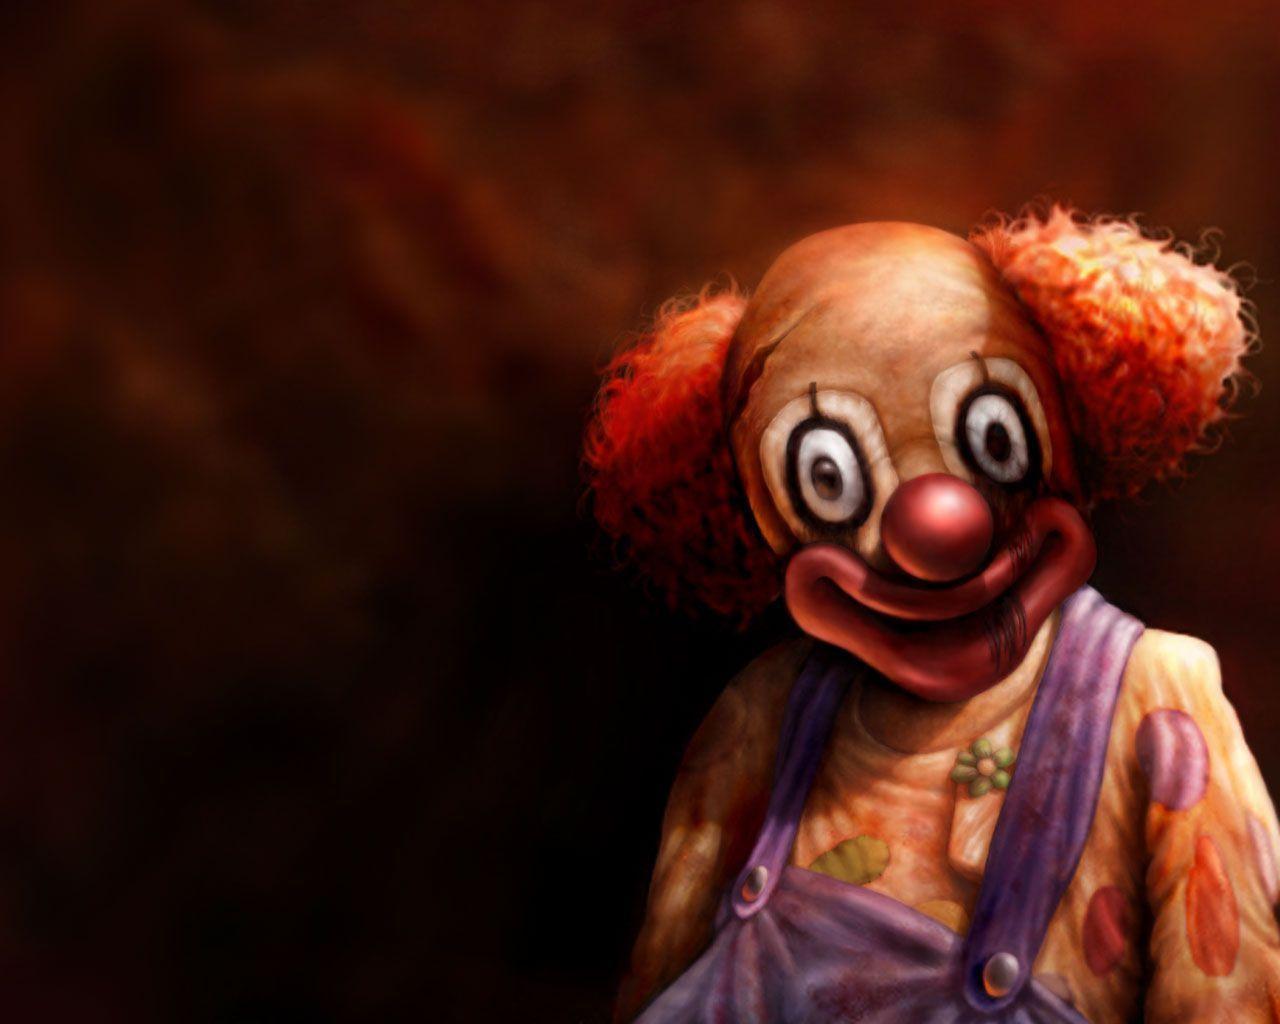 image For > Scary Clown Wallpaper